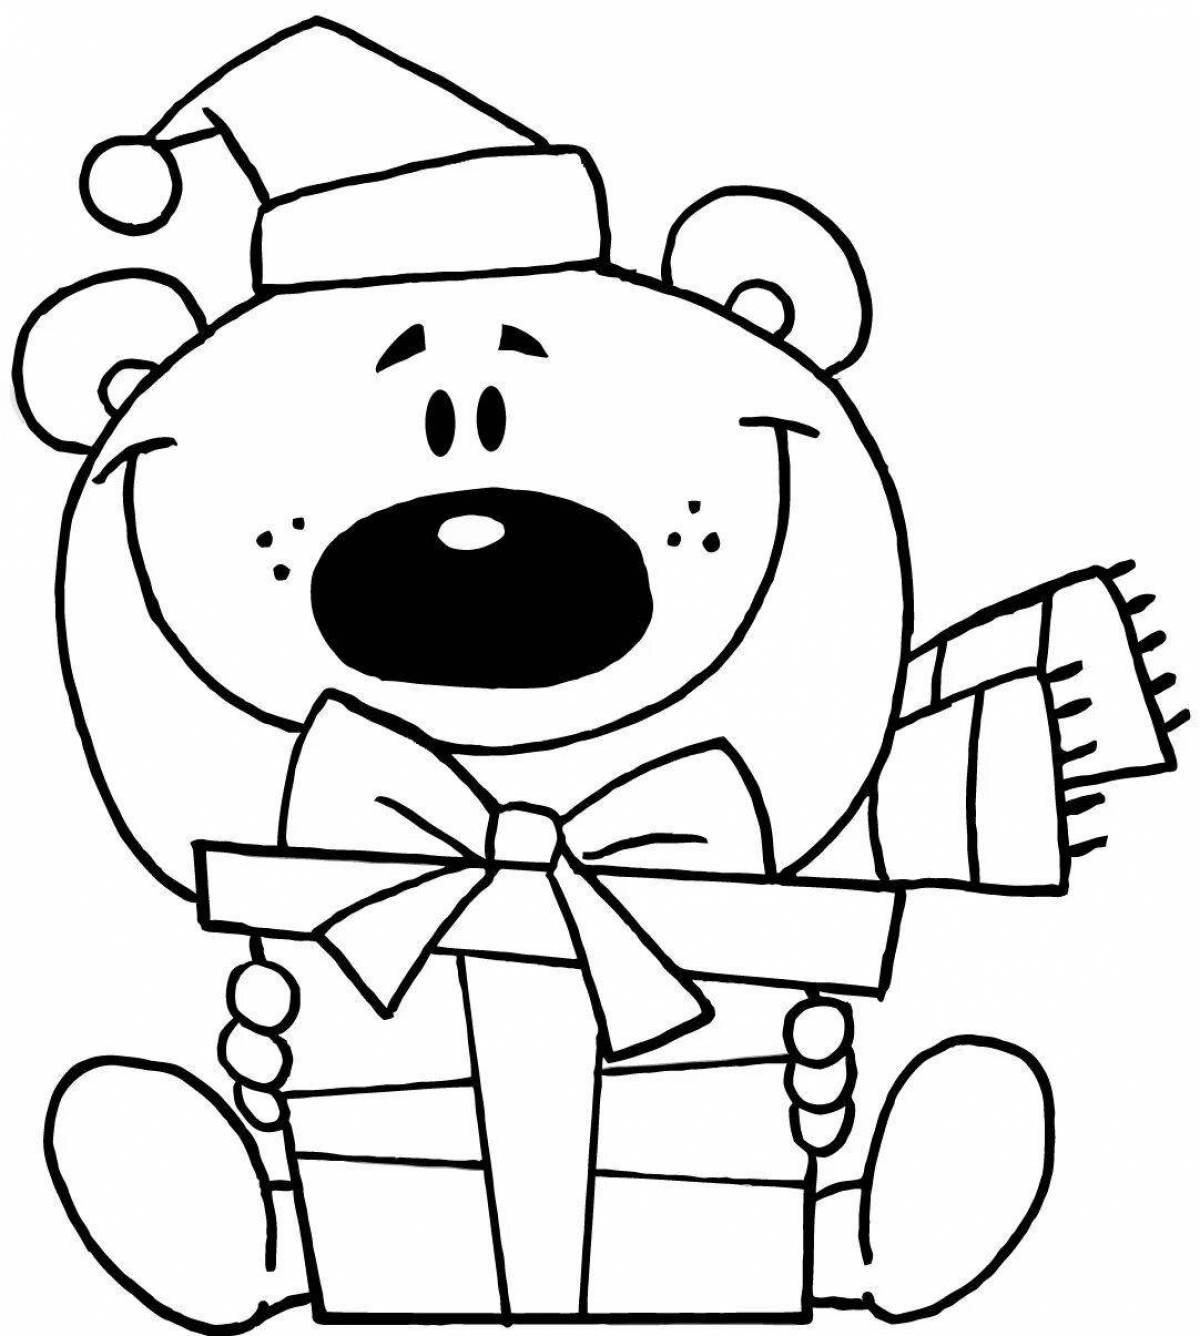 Brilliant teddy bear with a gift coloring book